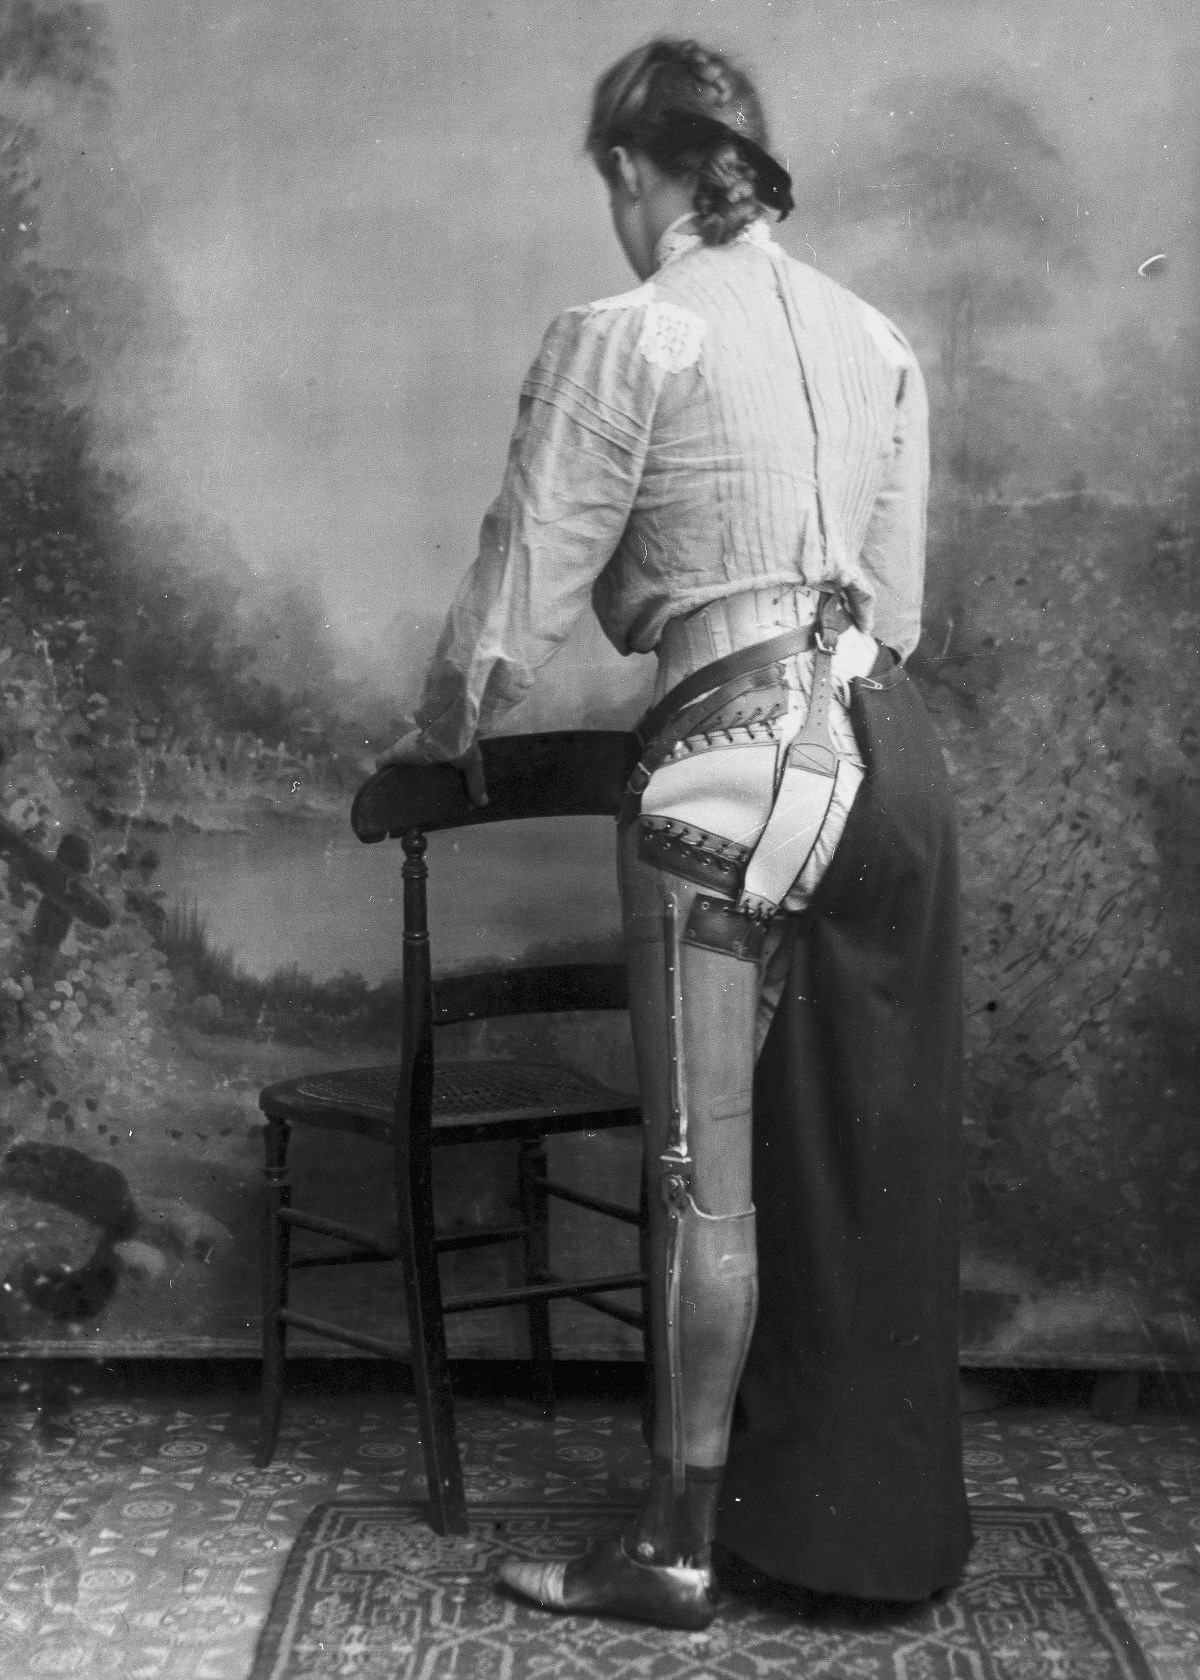 A woman shows off her prosthetic leg in the US in 1900.